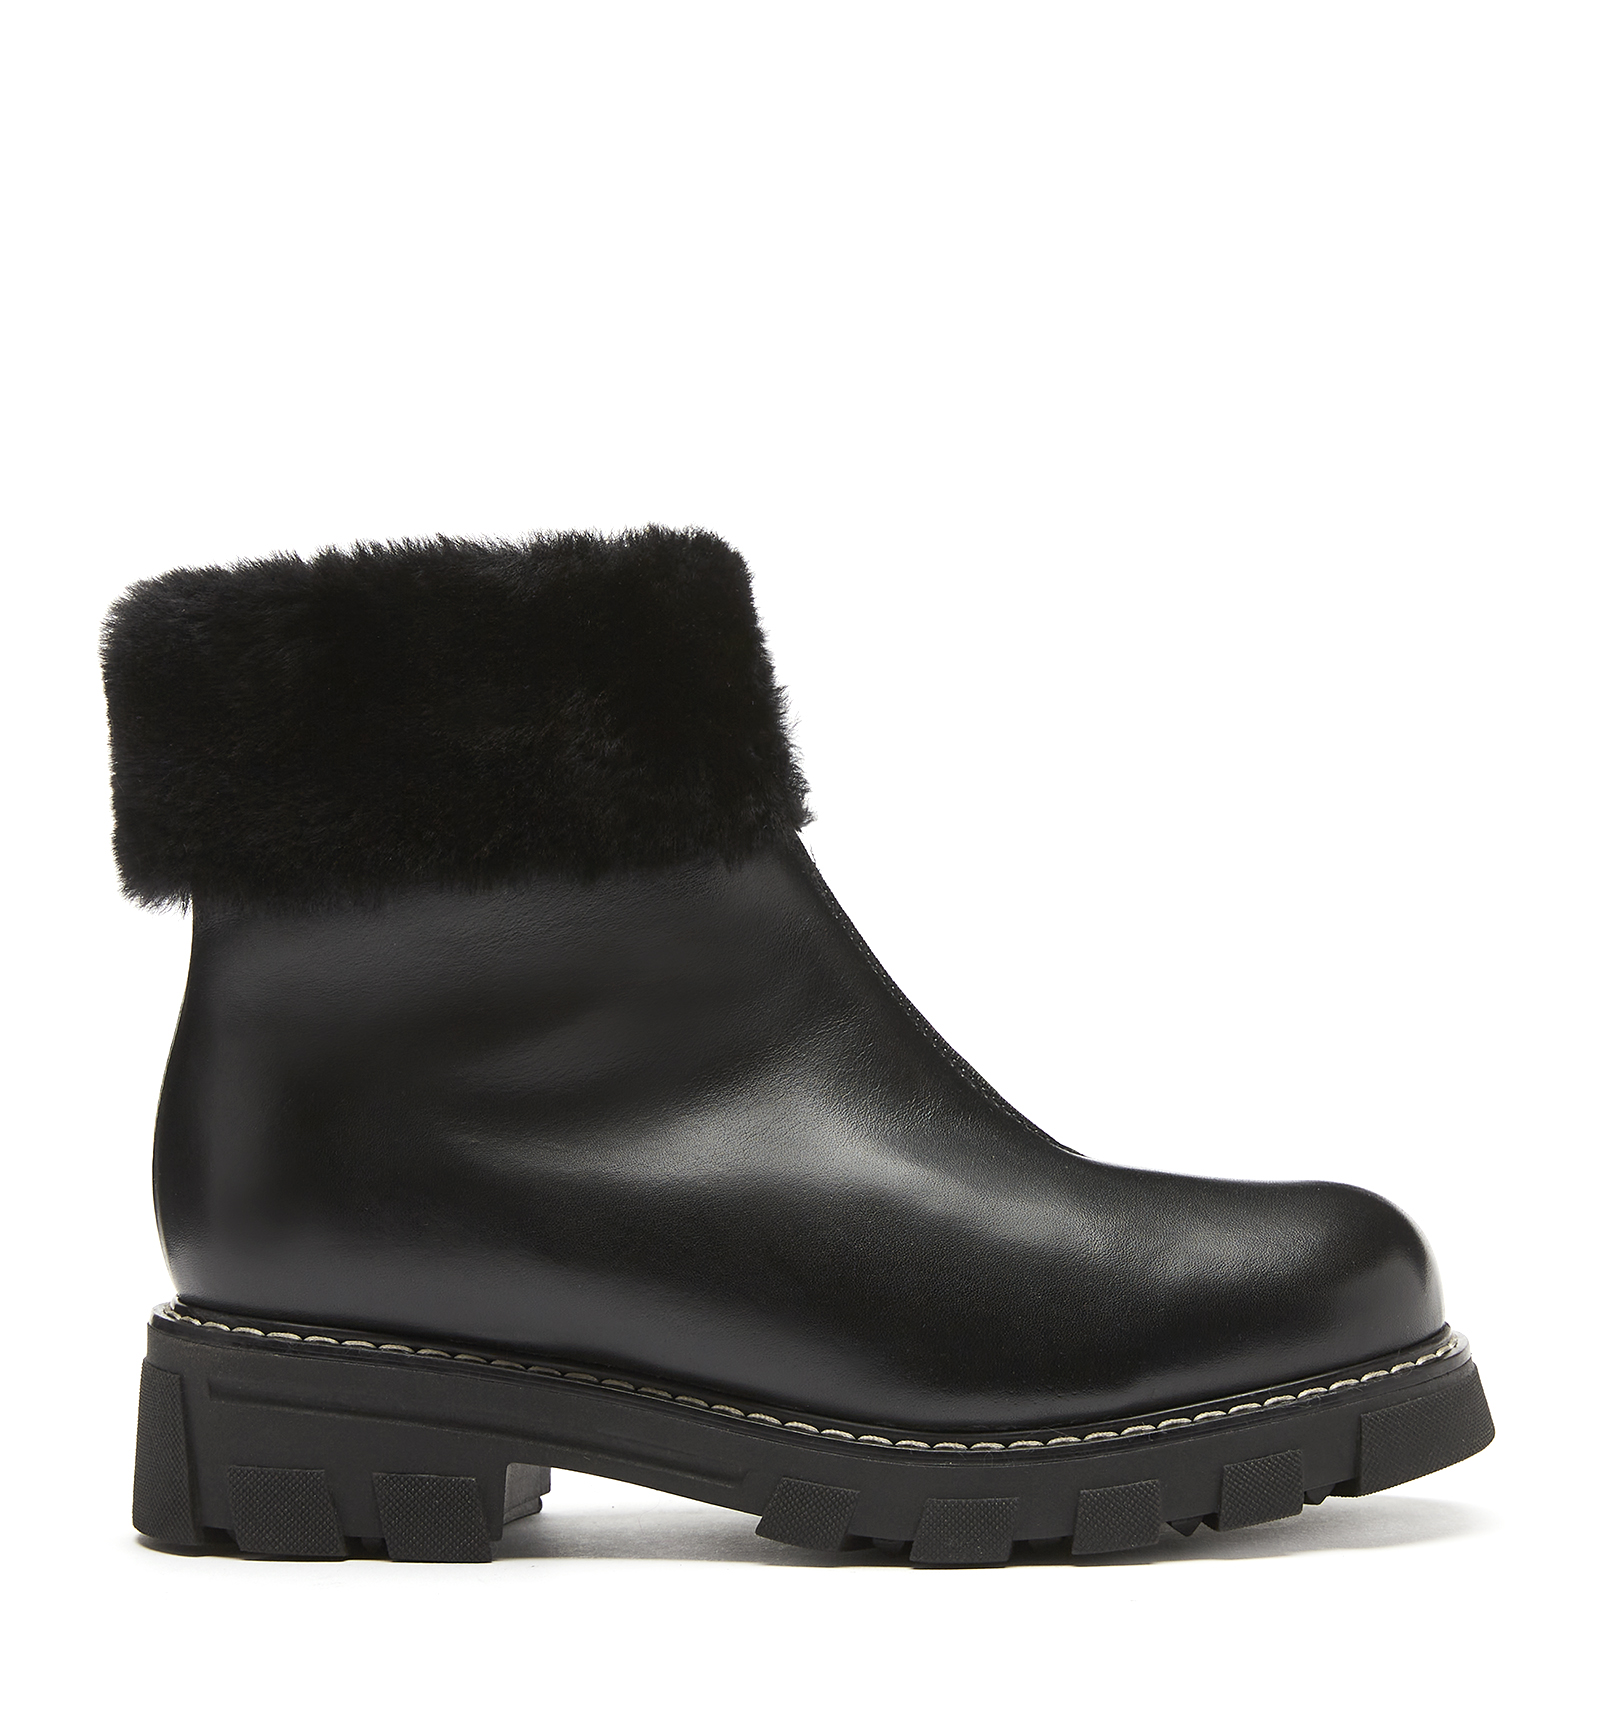 LA CANADIENNE ABBA X YOU SHEARLING LINED BOOTIE